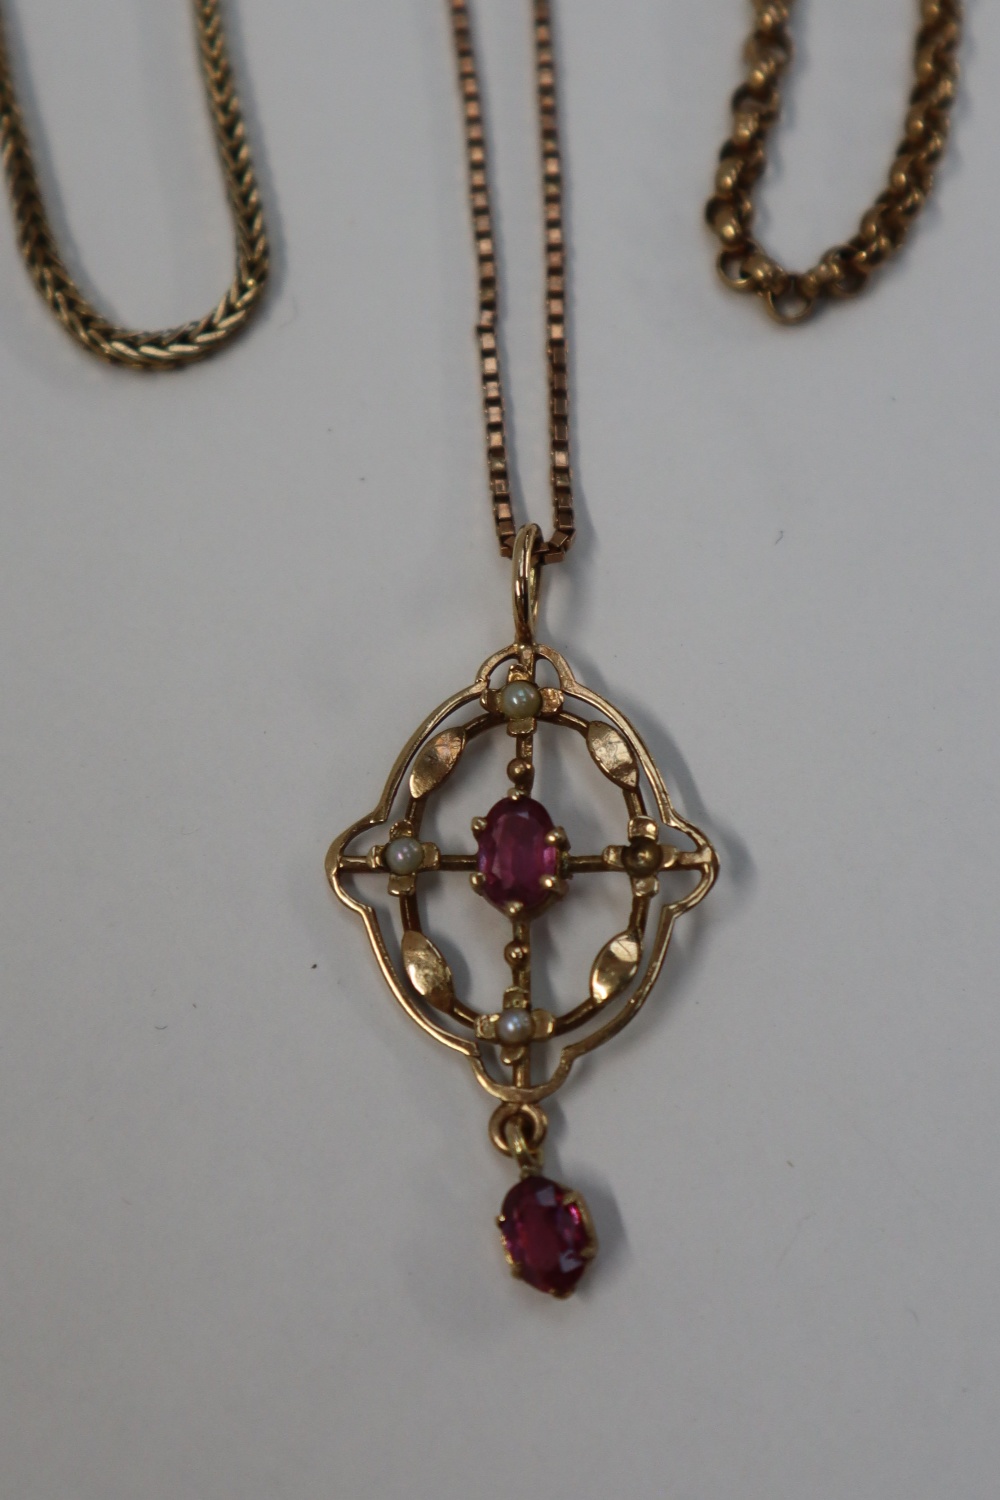 A 9ct gold ruby and seed pearl pendant on a 9ct gold chain together with 9ct gold necklaces,